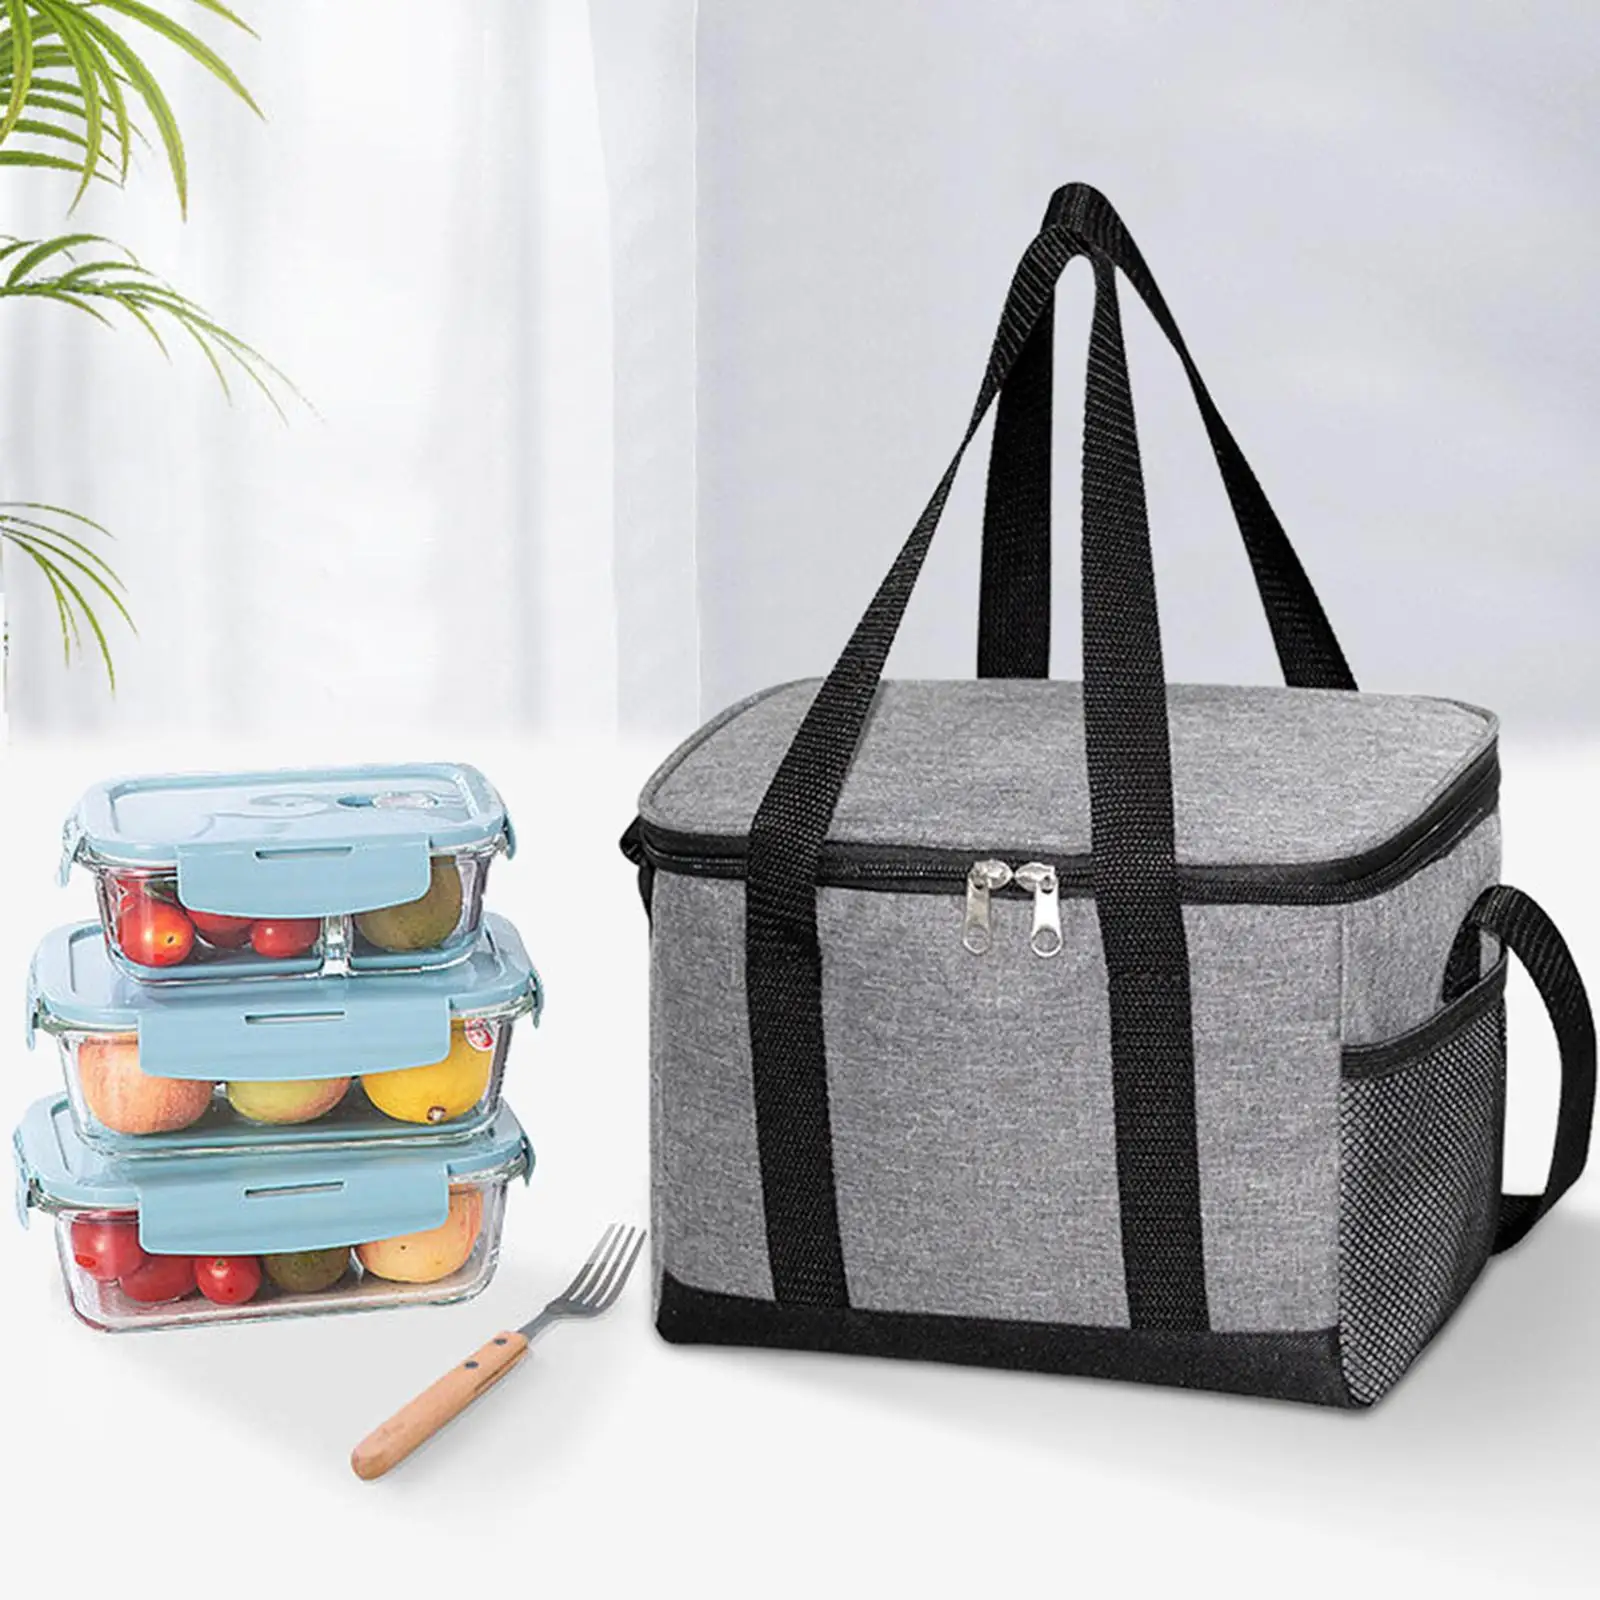 Insulated Lunch Shopping Bag Waterproof Reusable Outdoor Portable for Picnic